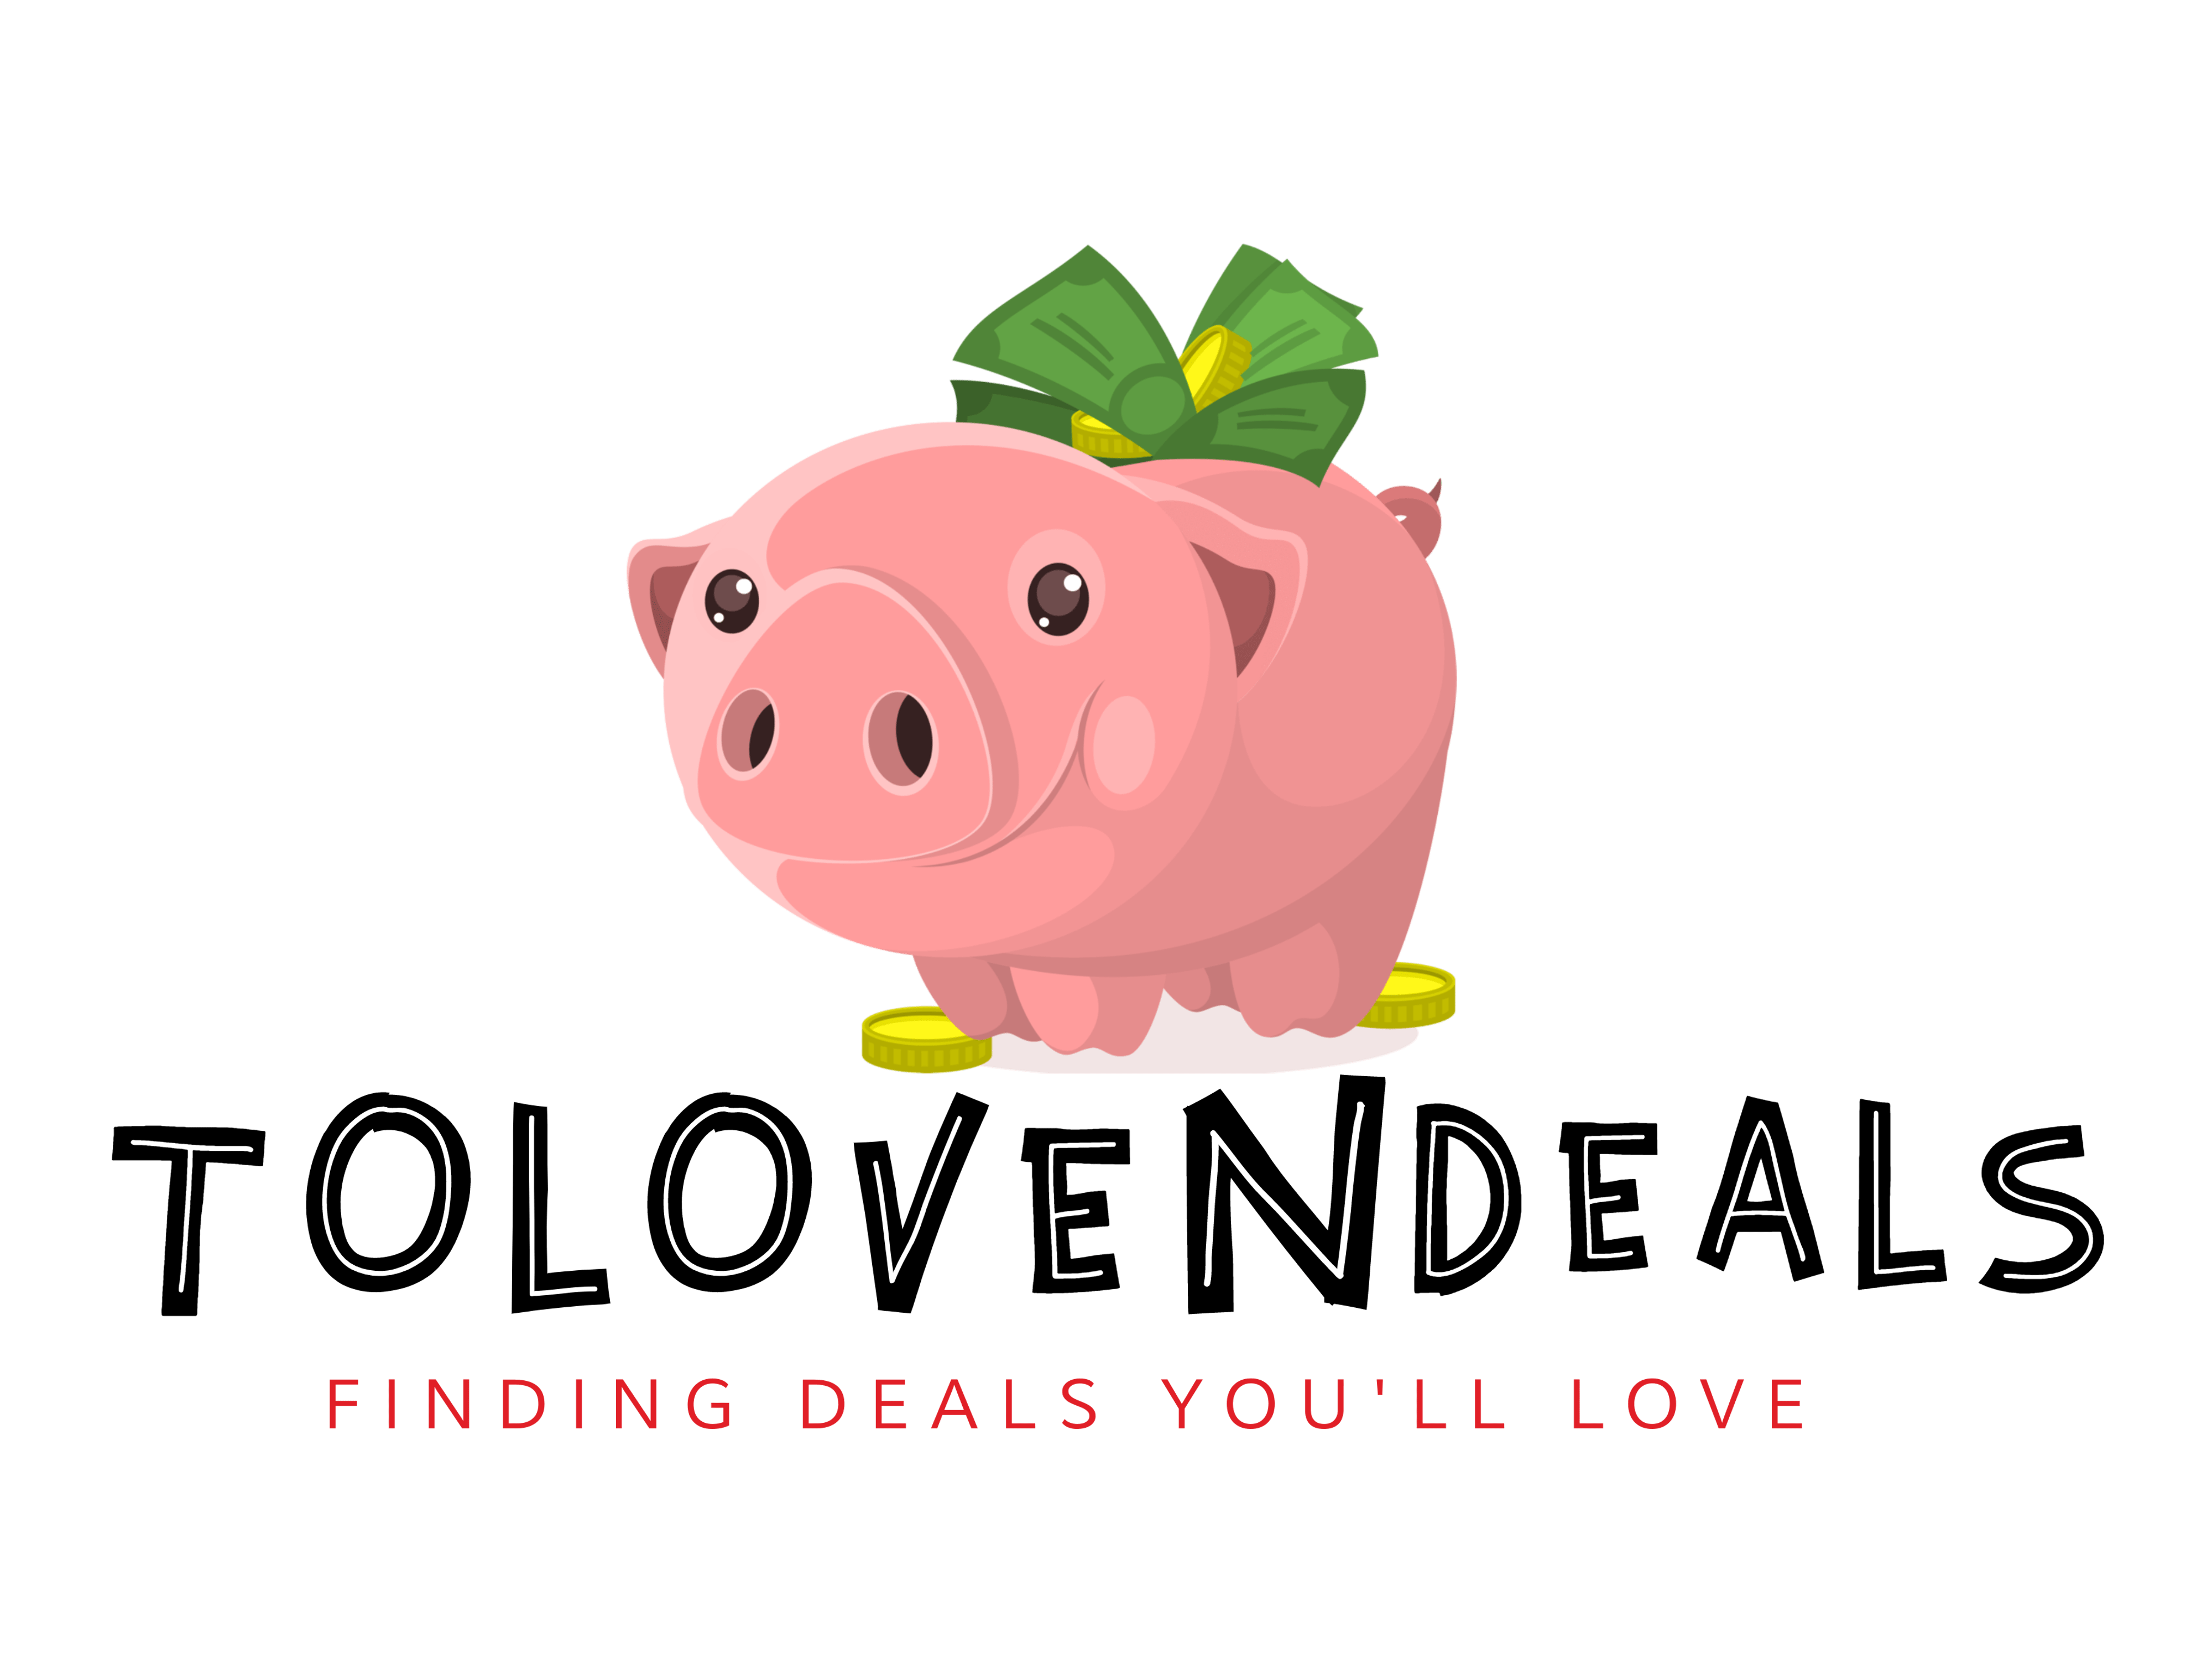 ToLoveNDeals: Helping save you money by finding the best Deals that you will love.